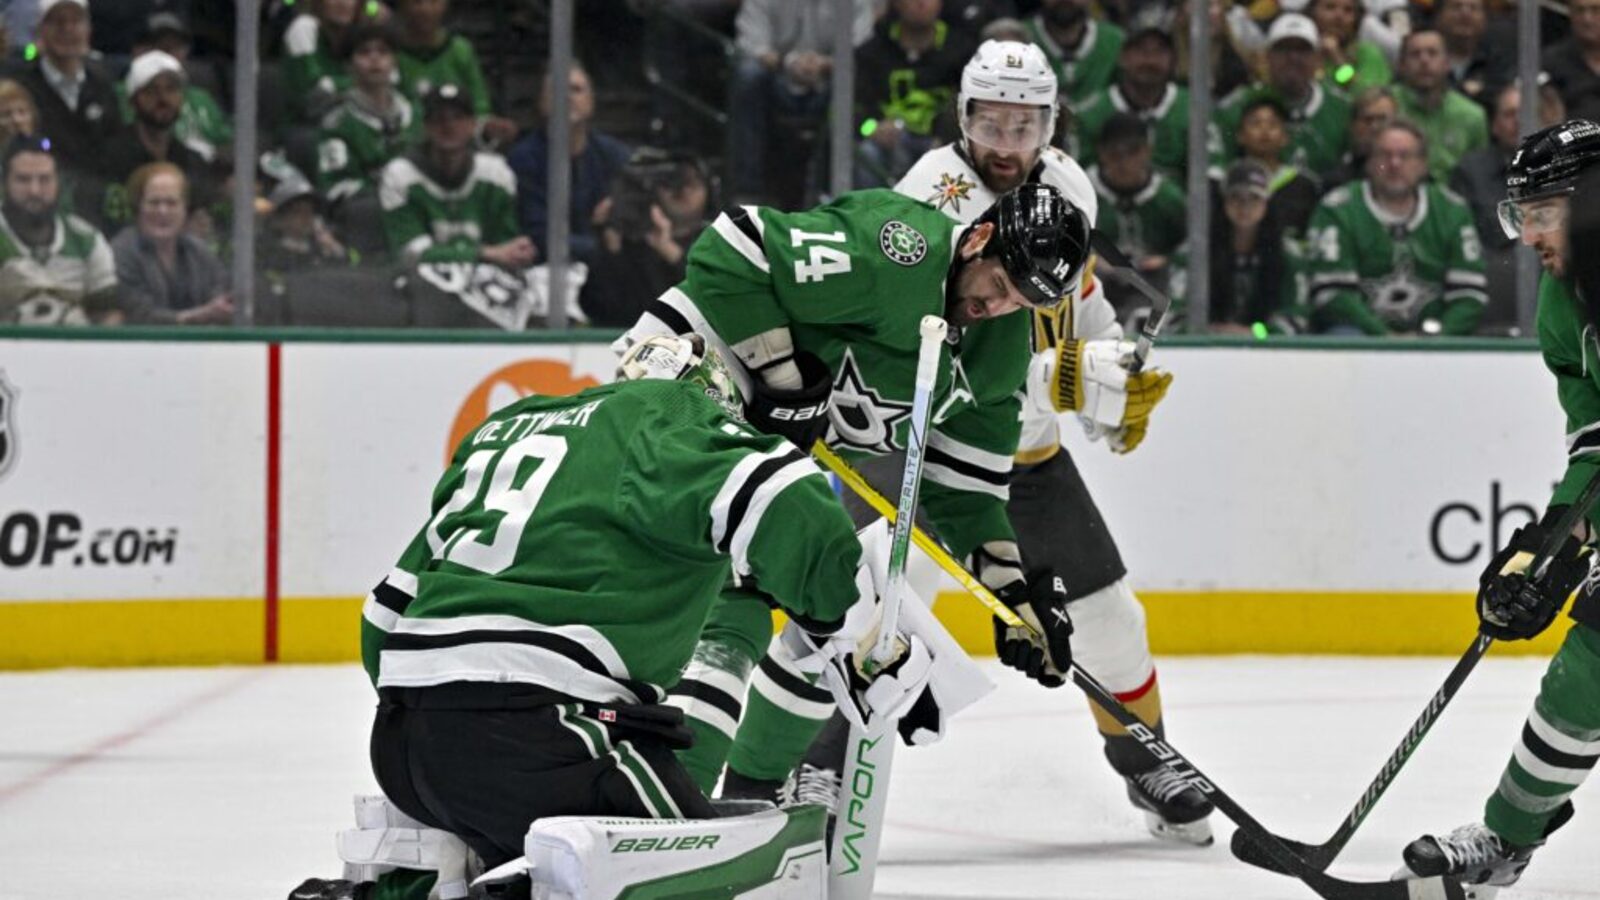 Stars vs. Avalanche second-round playoff series preview